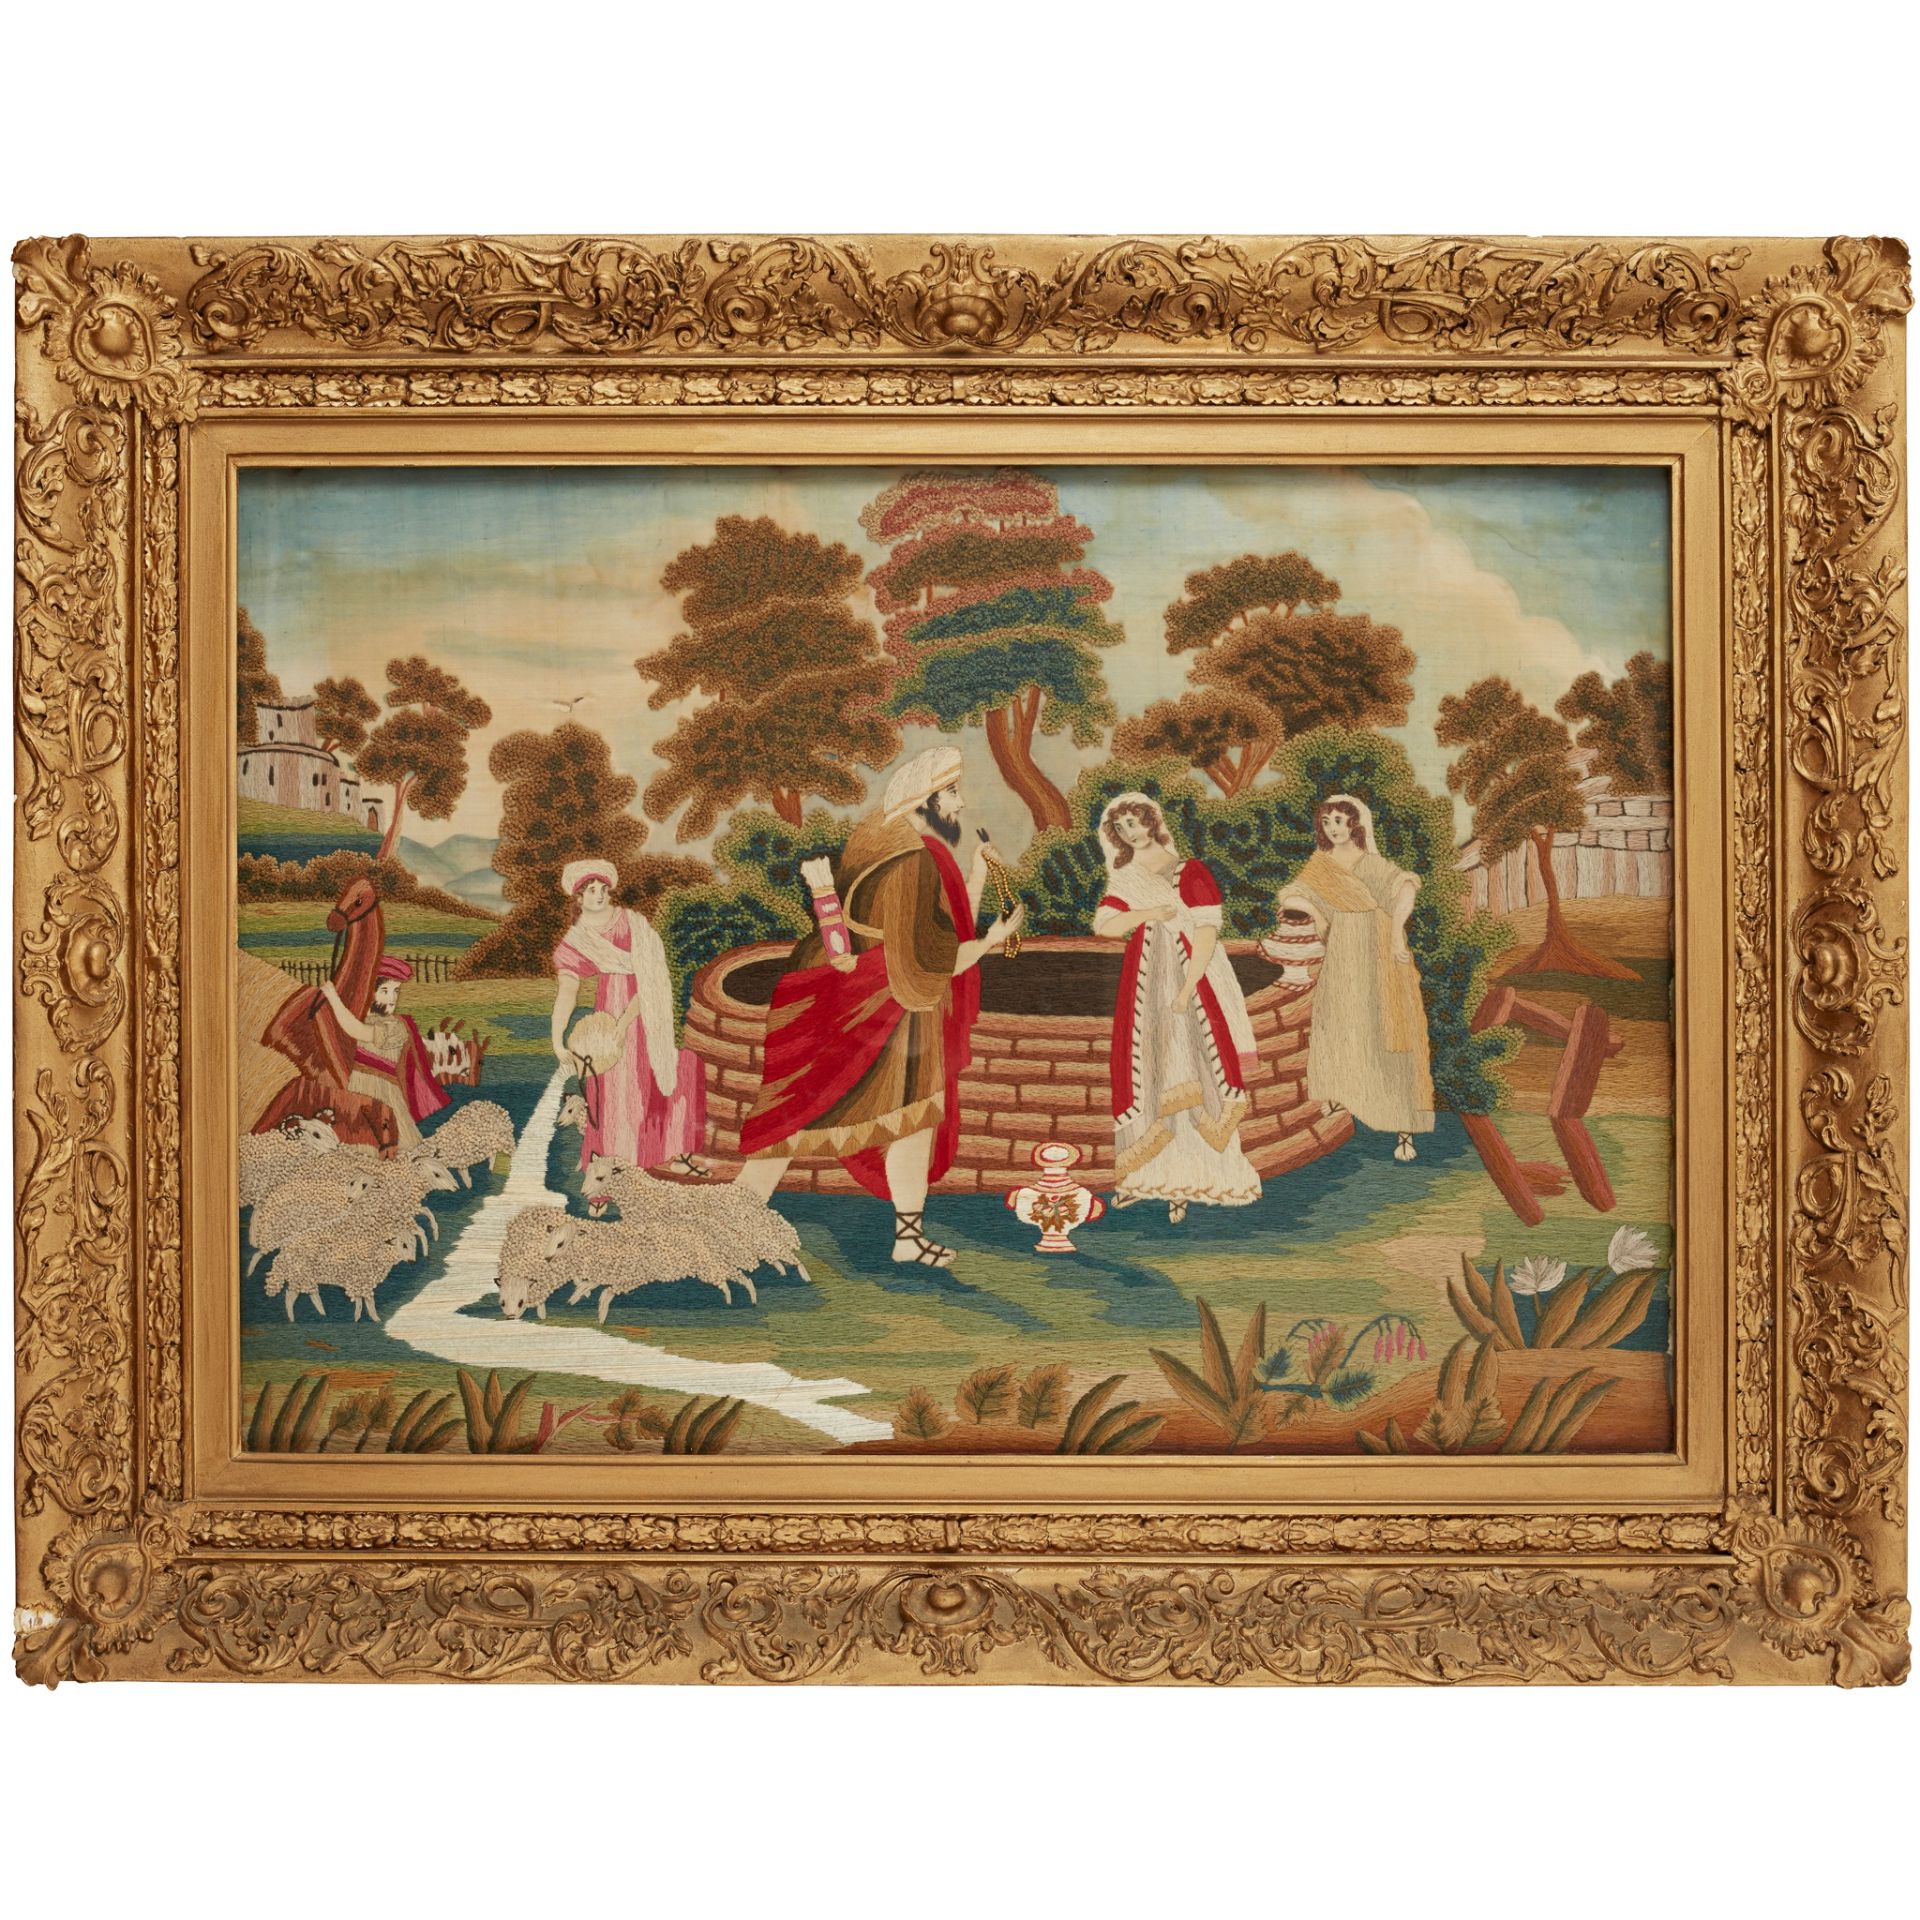 LARGE NEEDLEWORK PICTURE OF REBECCA AT THE WELL EARLY 19TH CENTURY